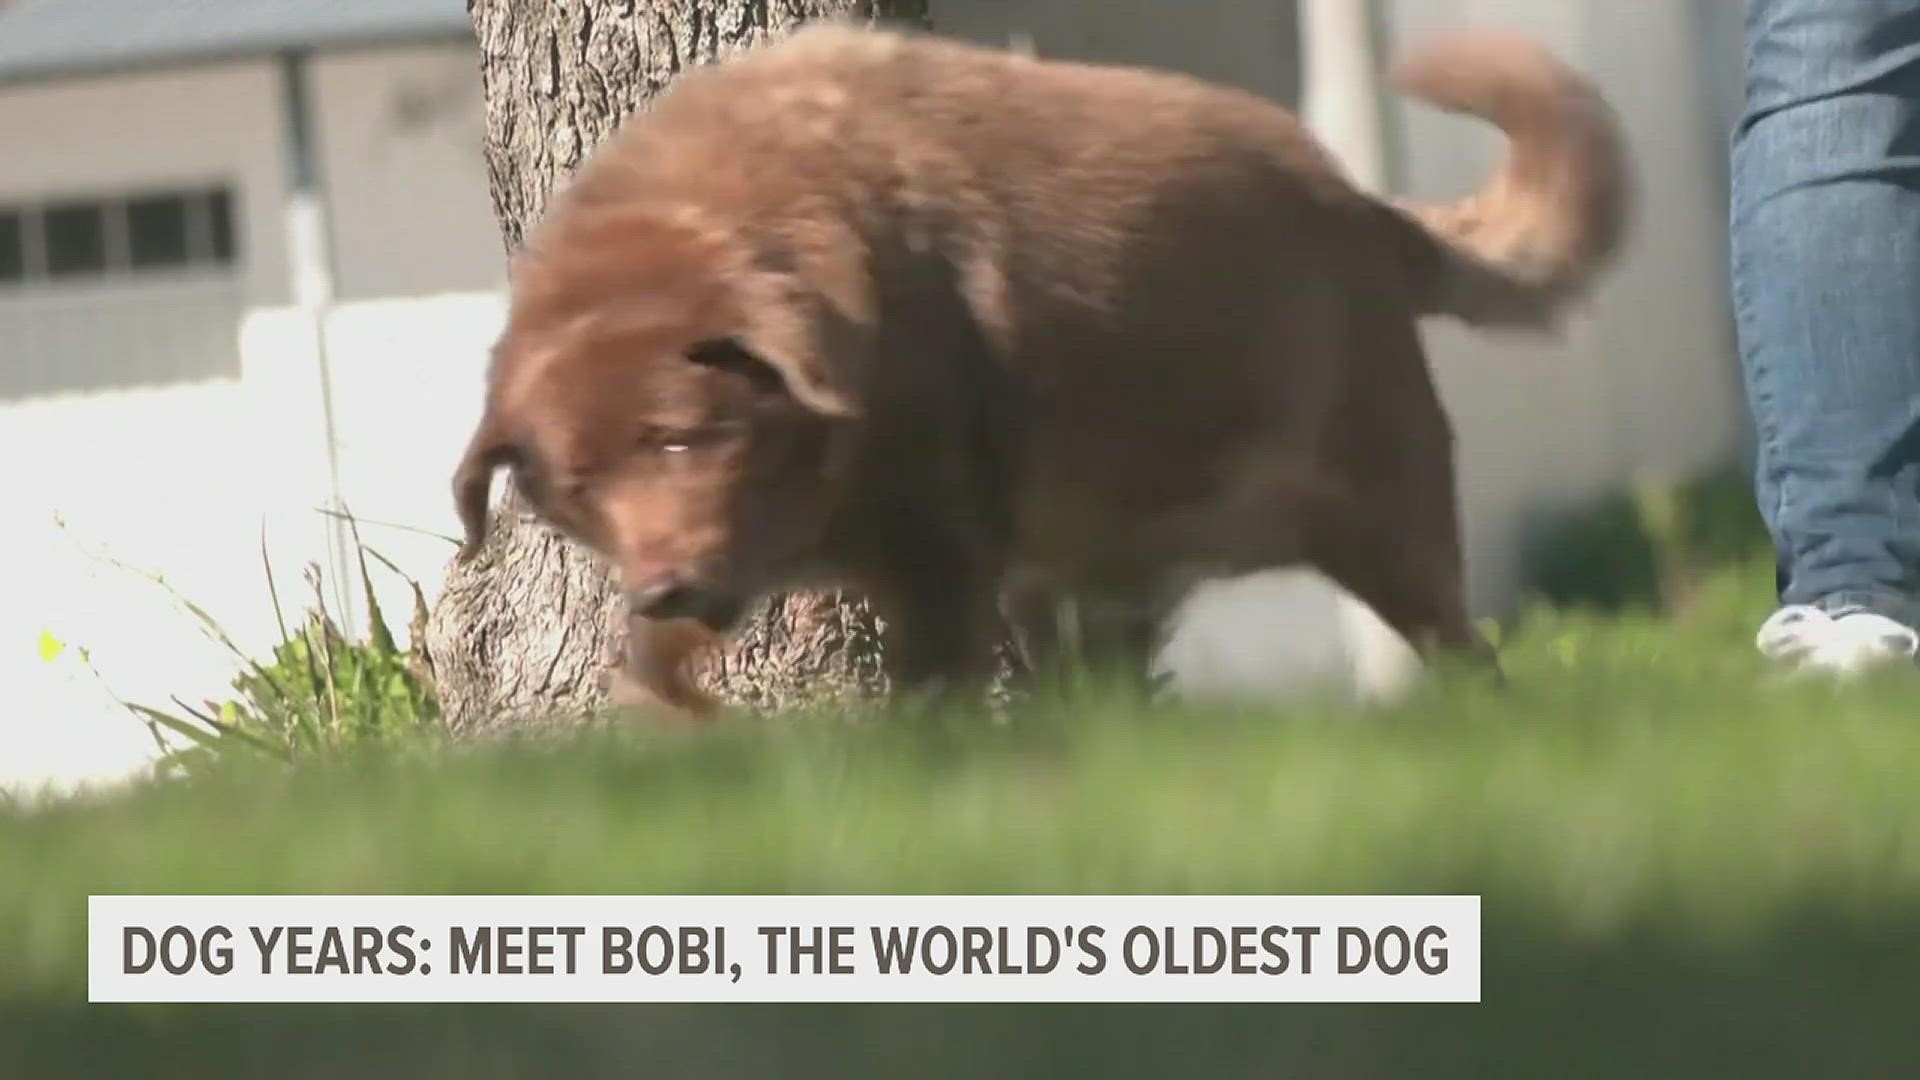 Two weeks after a 23-year-old chihuahua mix from Ohio was named the world's oldest living dog, he's been bumped from the top spot by a much older dog.